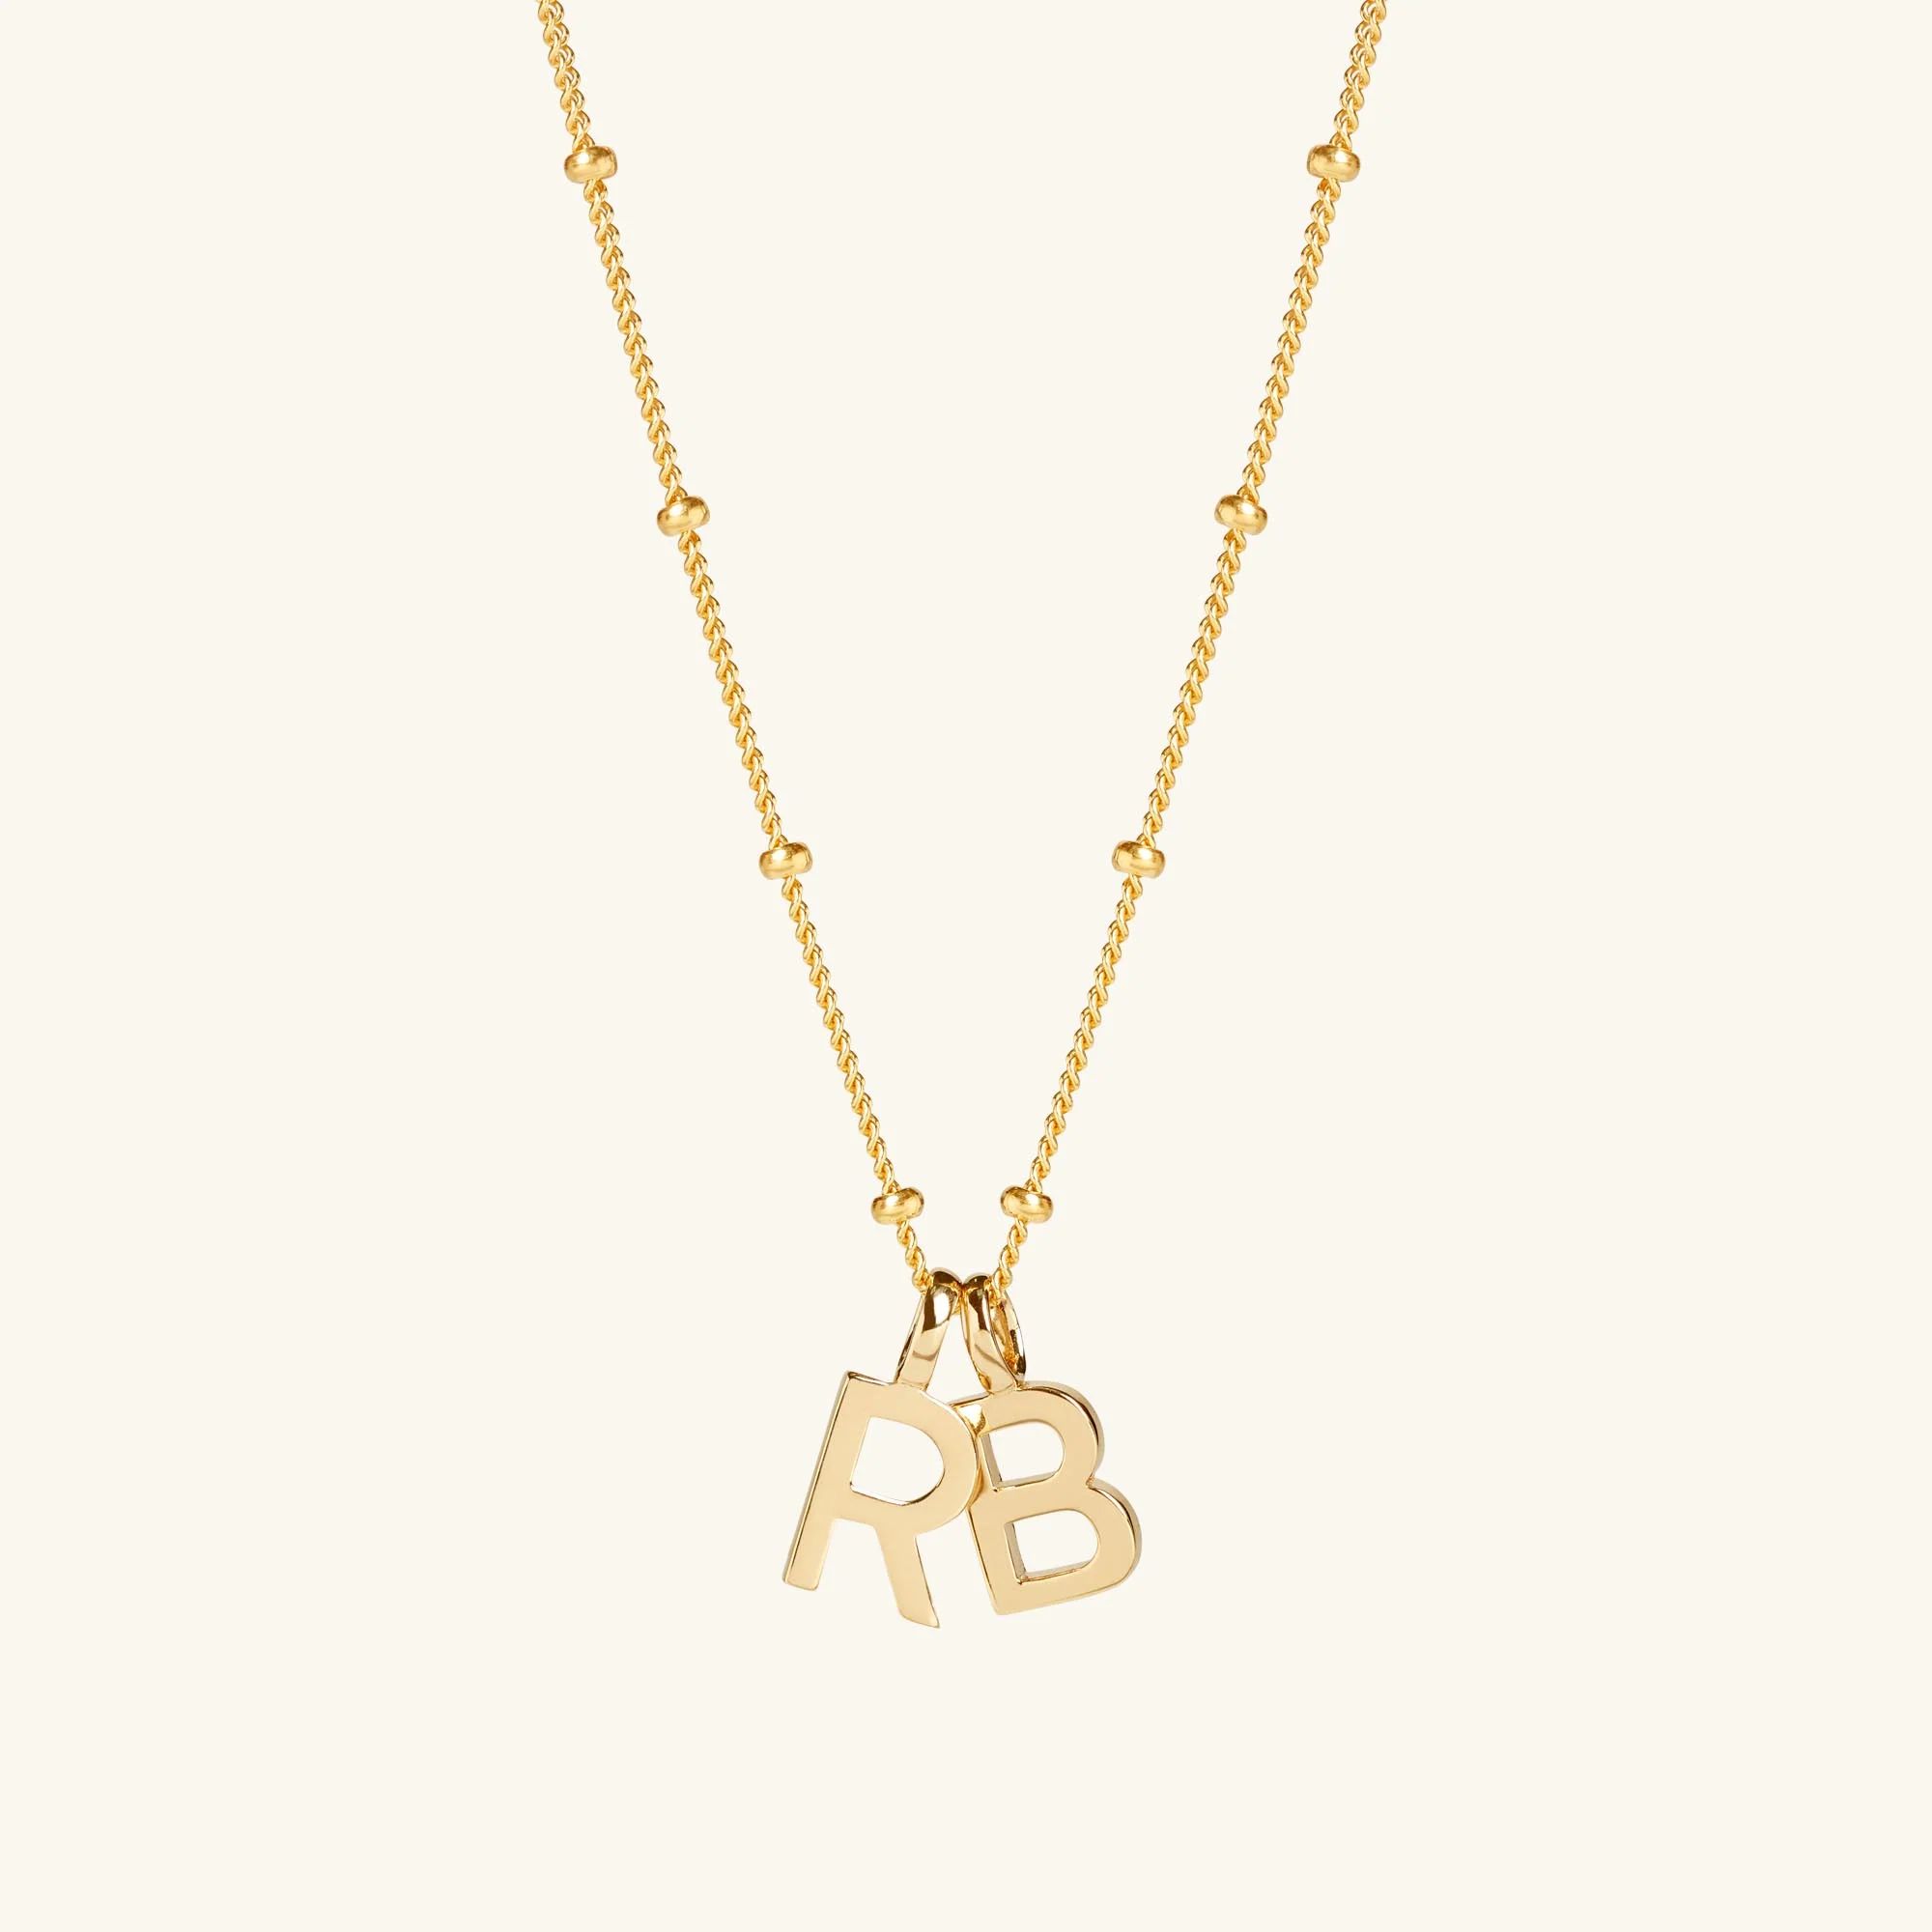 Double Letter, 18ct Gold-Plated Vermeil On Sterling Silver, Women's Necklace with Bead Chain | Muru Jewellery.